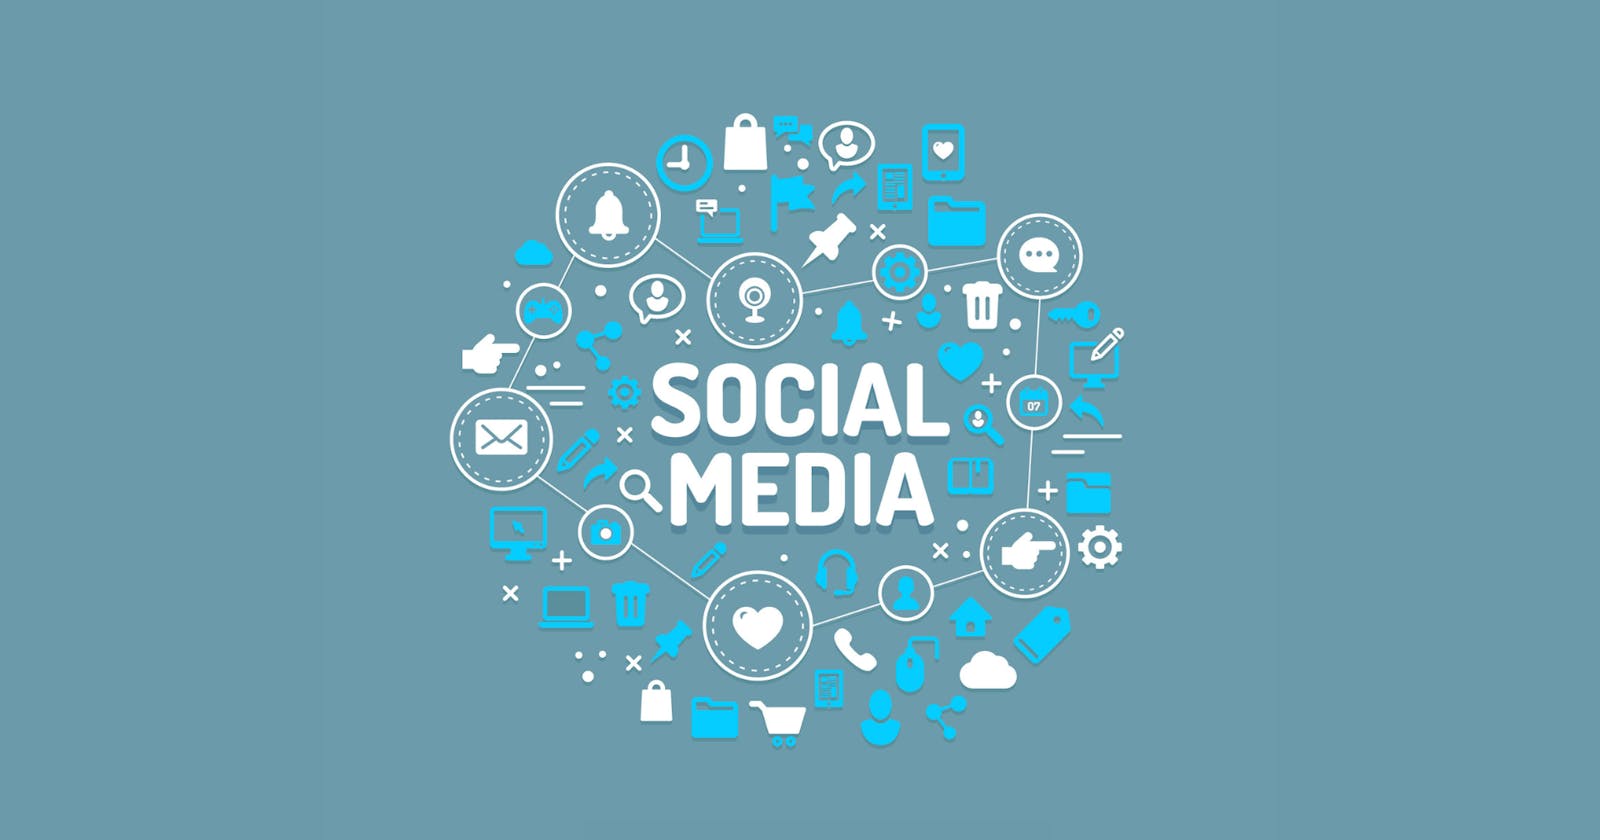 5 Effective Social Media Marketing Strategies for Small Businesses